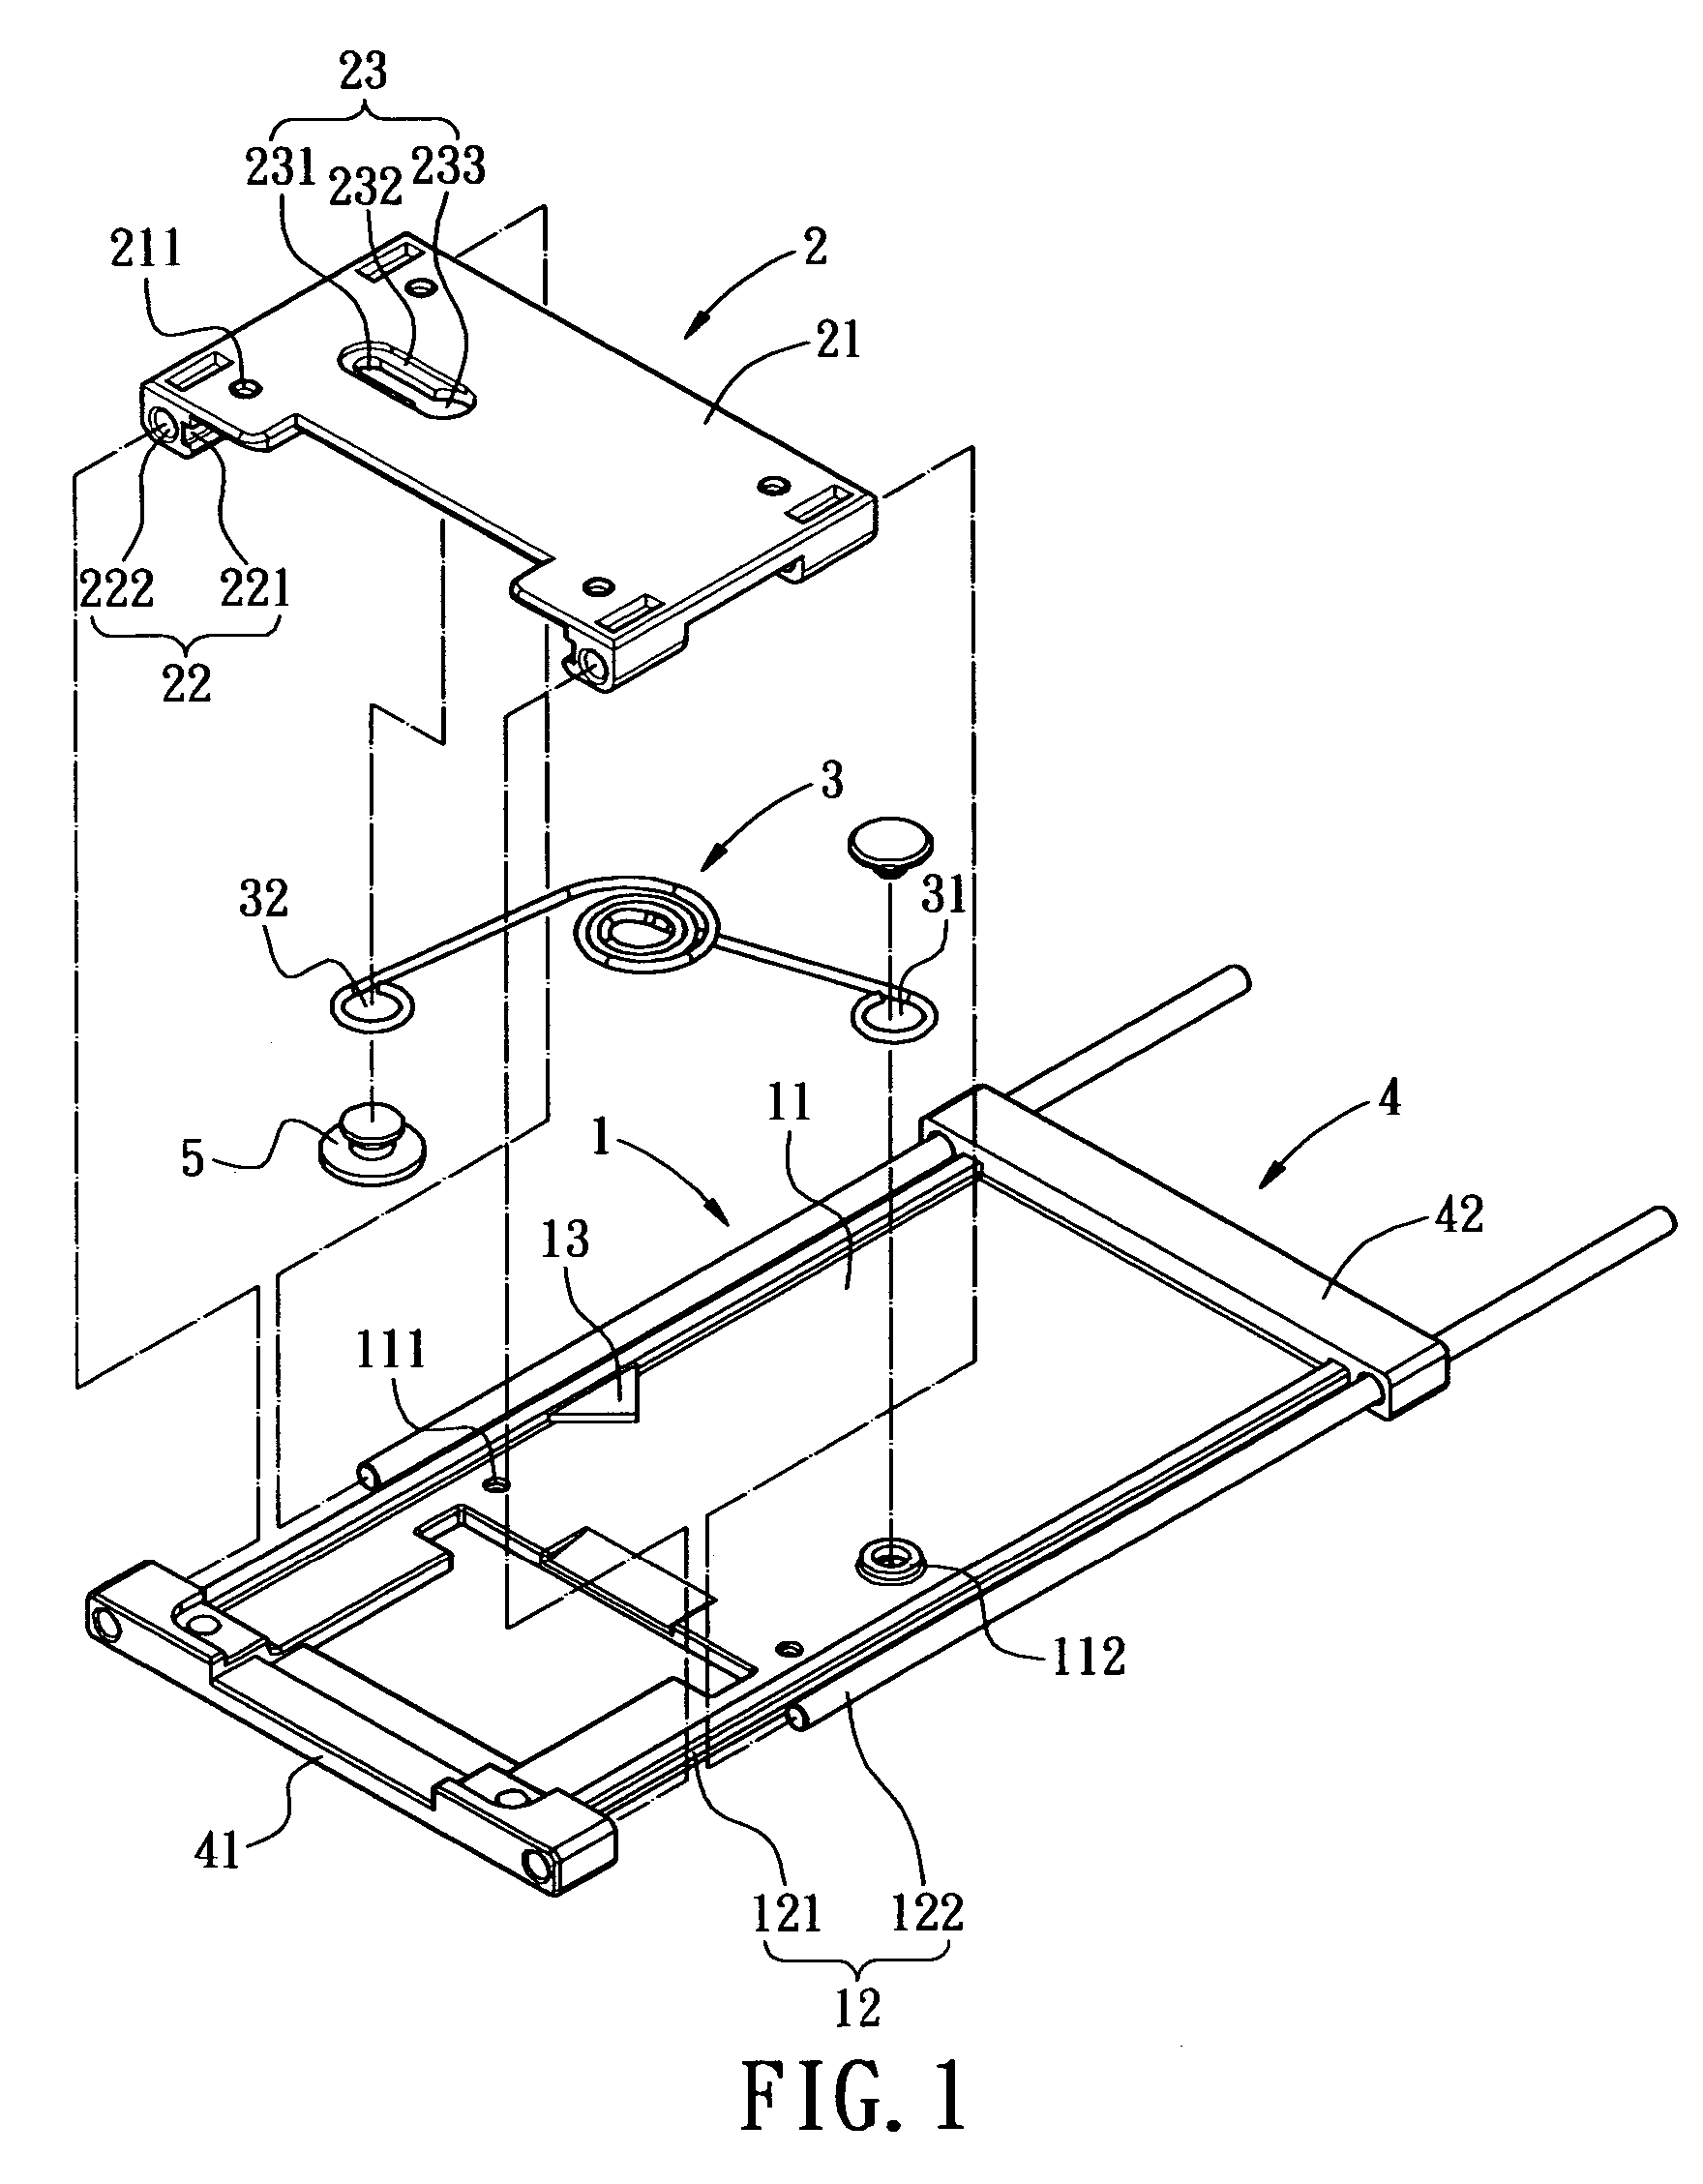 Gliding structure for glide-open type mobile phone